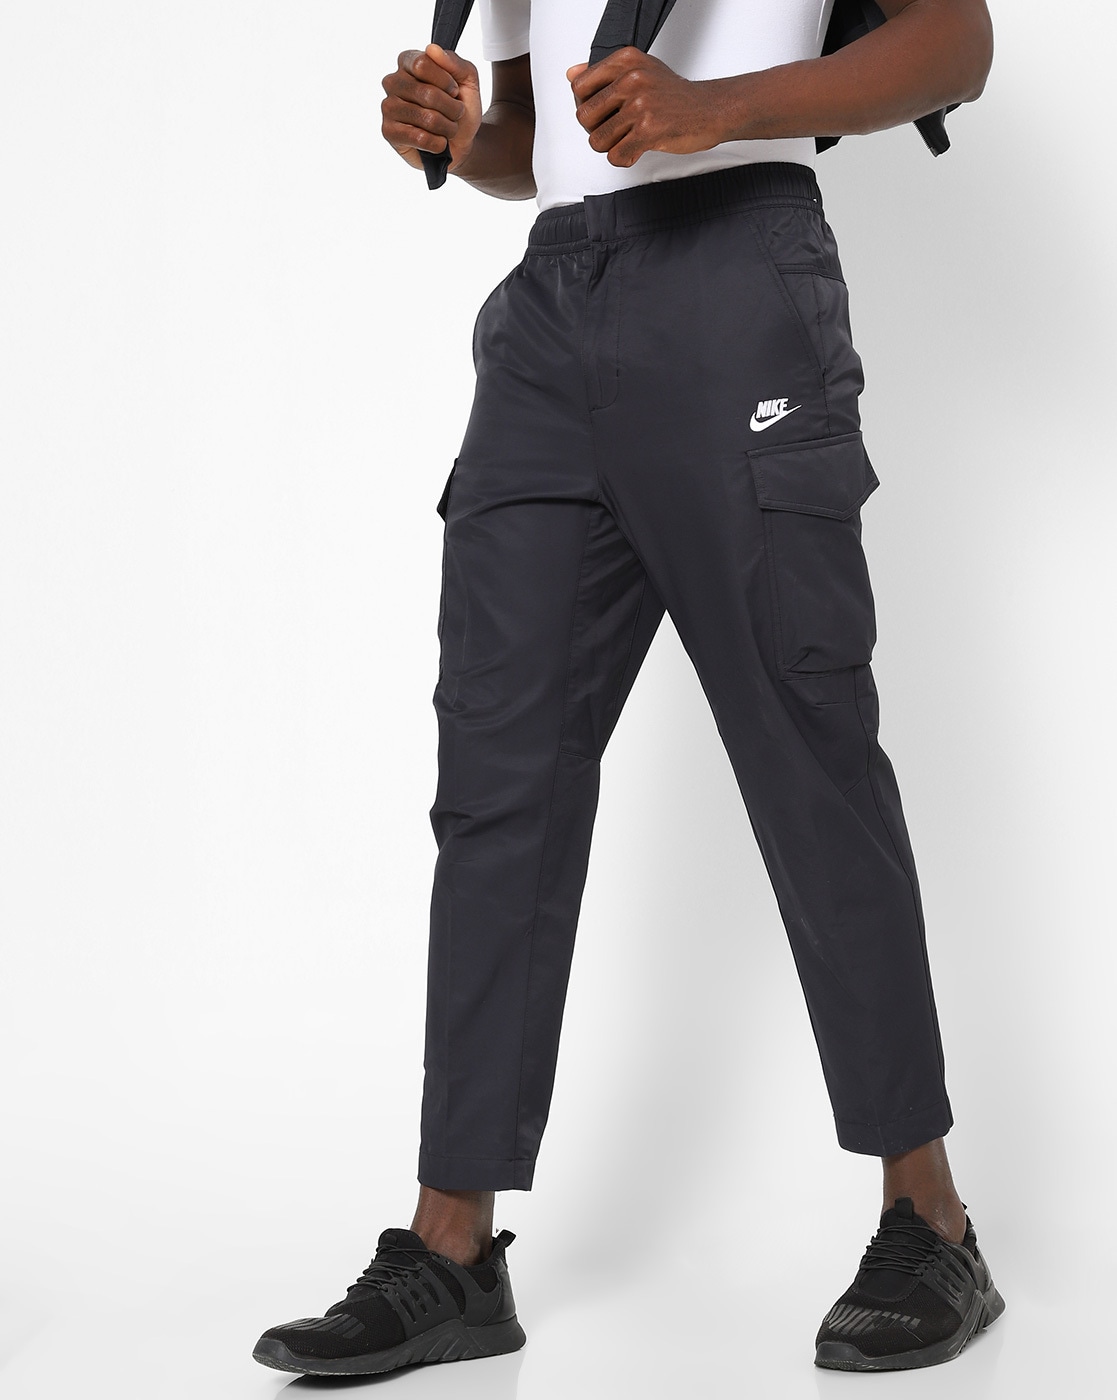 Top more than 164 nike utility running pants latest - in.eteachers